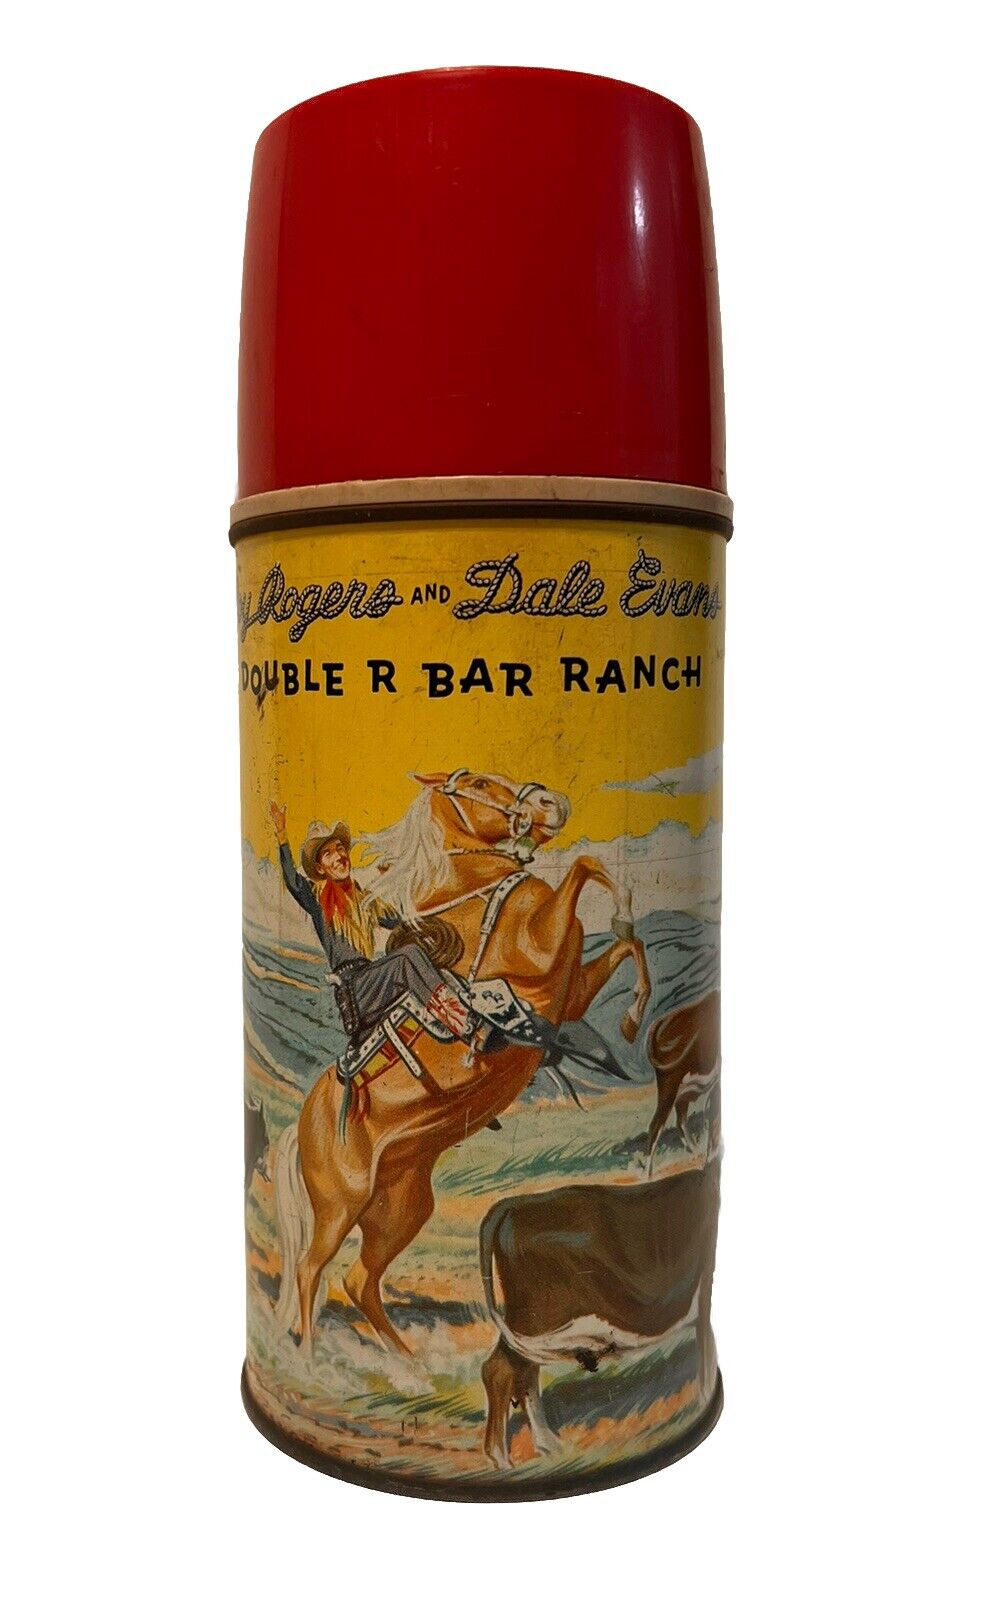 VTG Roy Rogers and Dale Evans Double R Bar Ranch Metal Thermos 1950s Red Cap